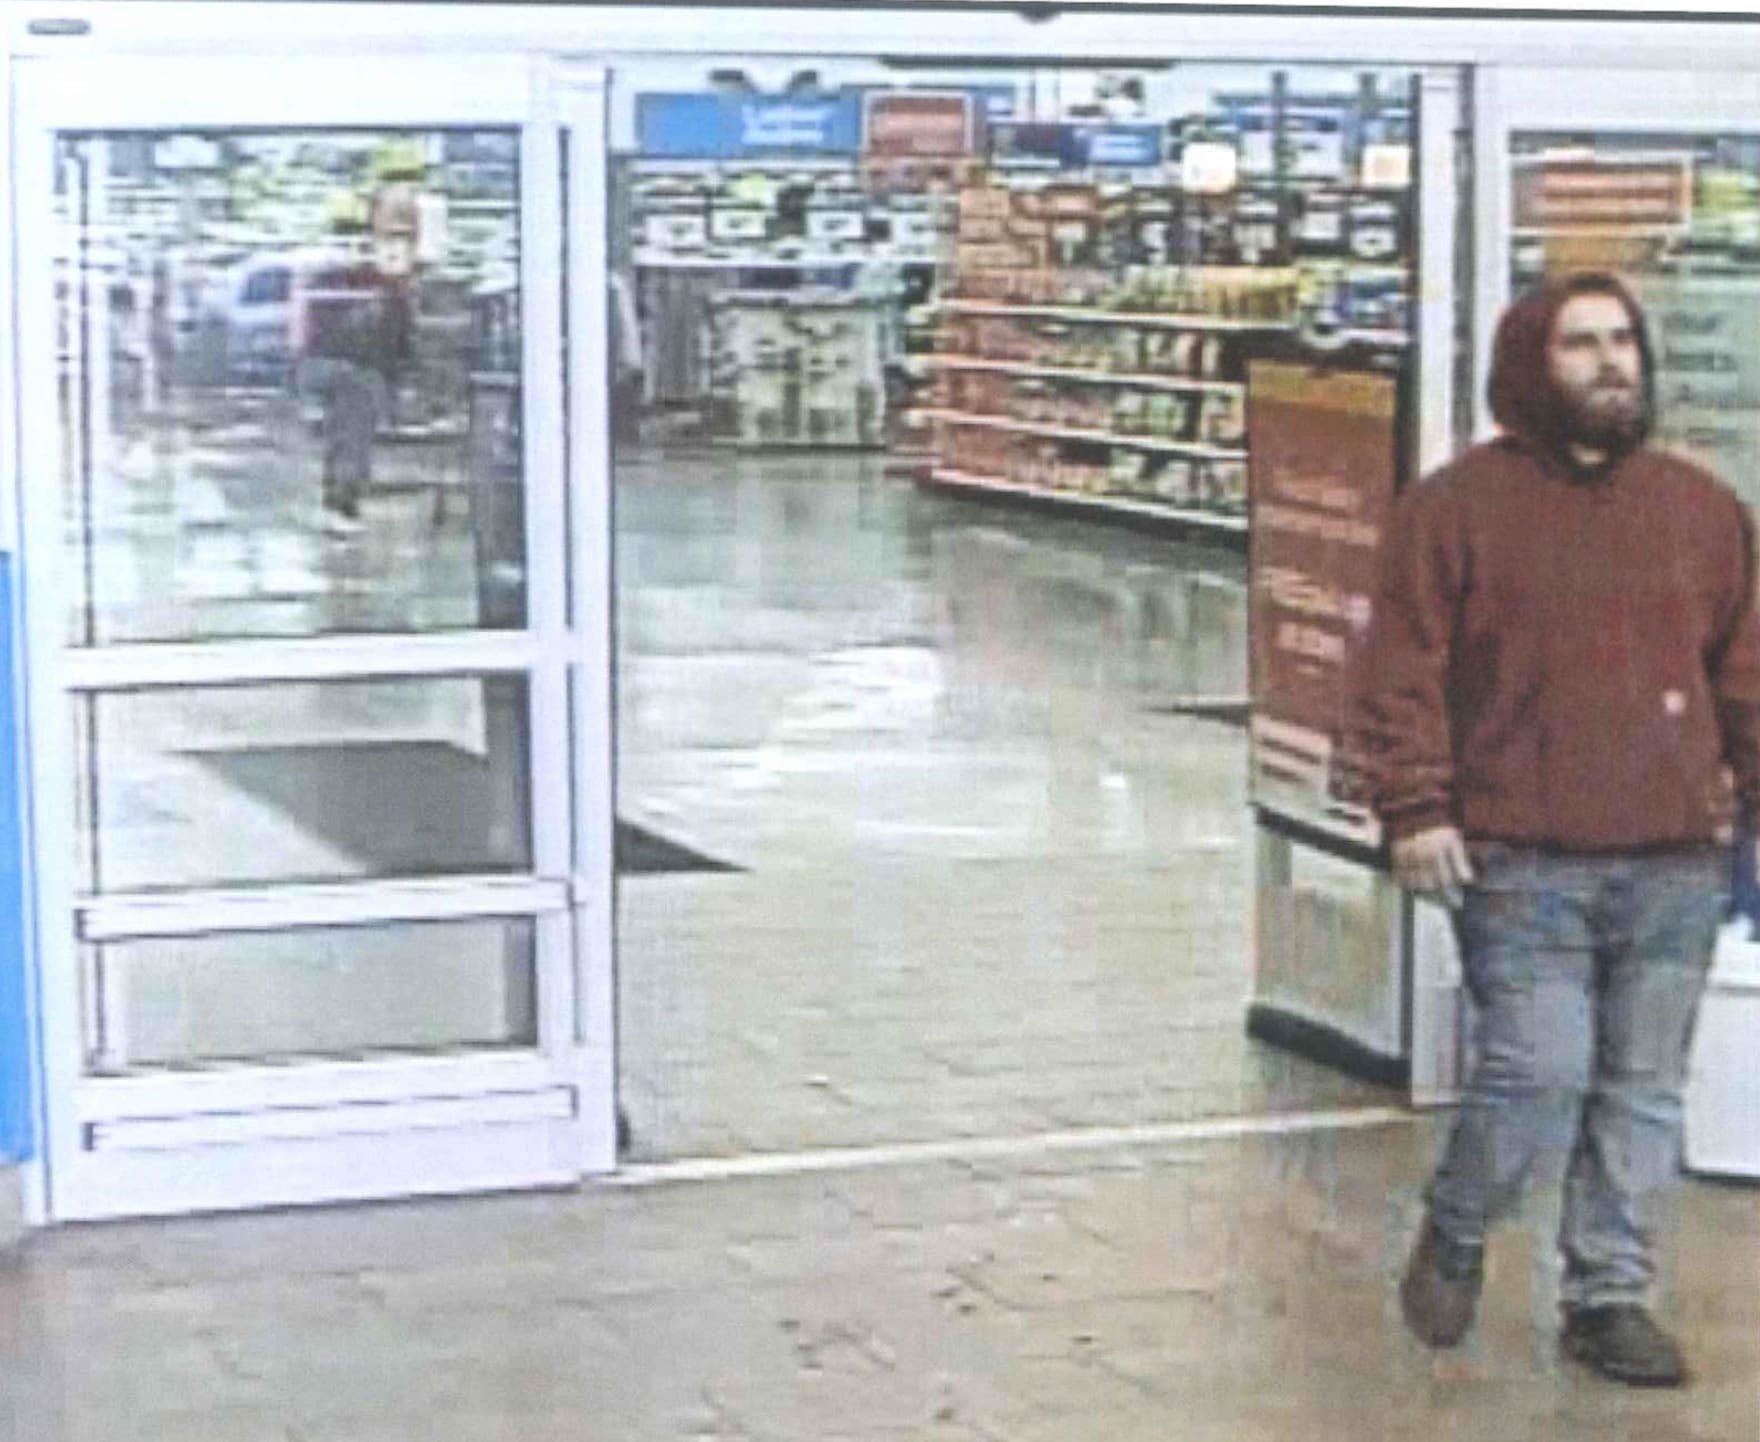 Battle Ground police are looking for this man, shown here in surveillance video taken from the Wal-Mart, in connection with a March 15 report of two females being touched inappropriately.